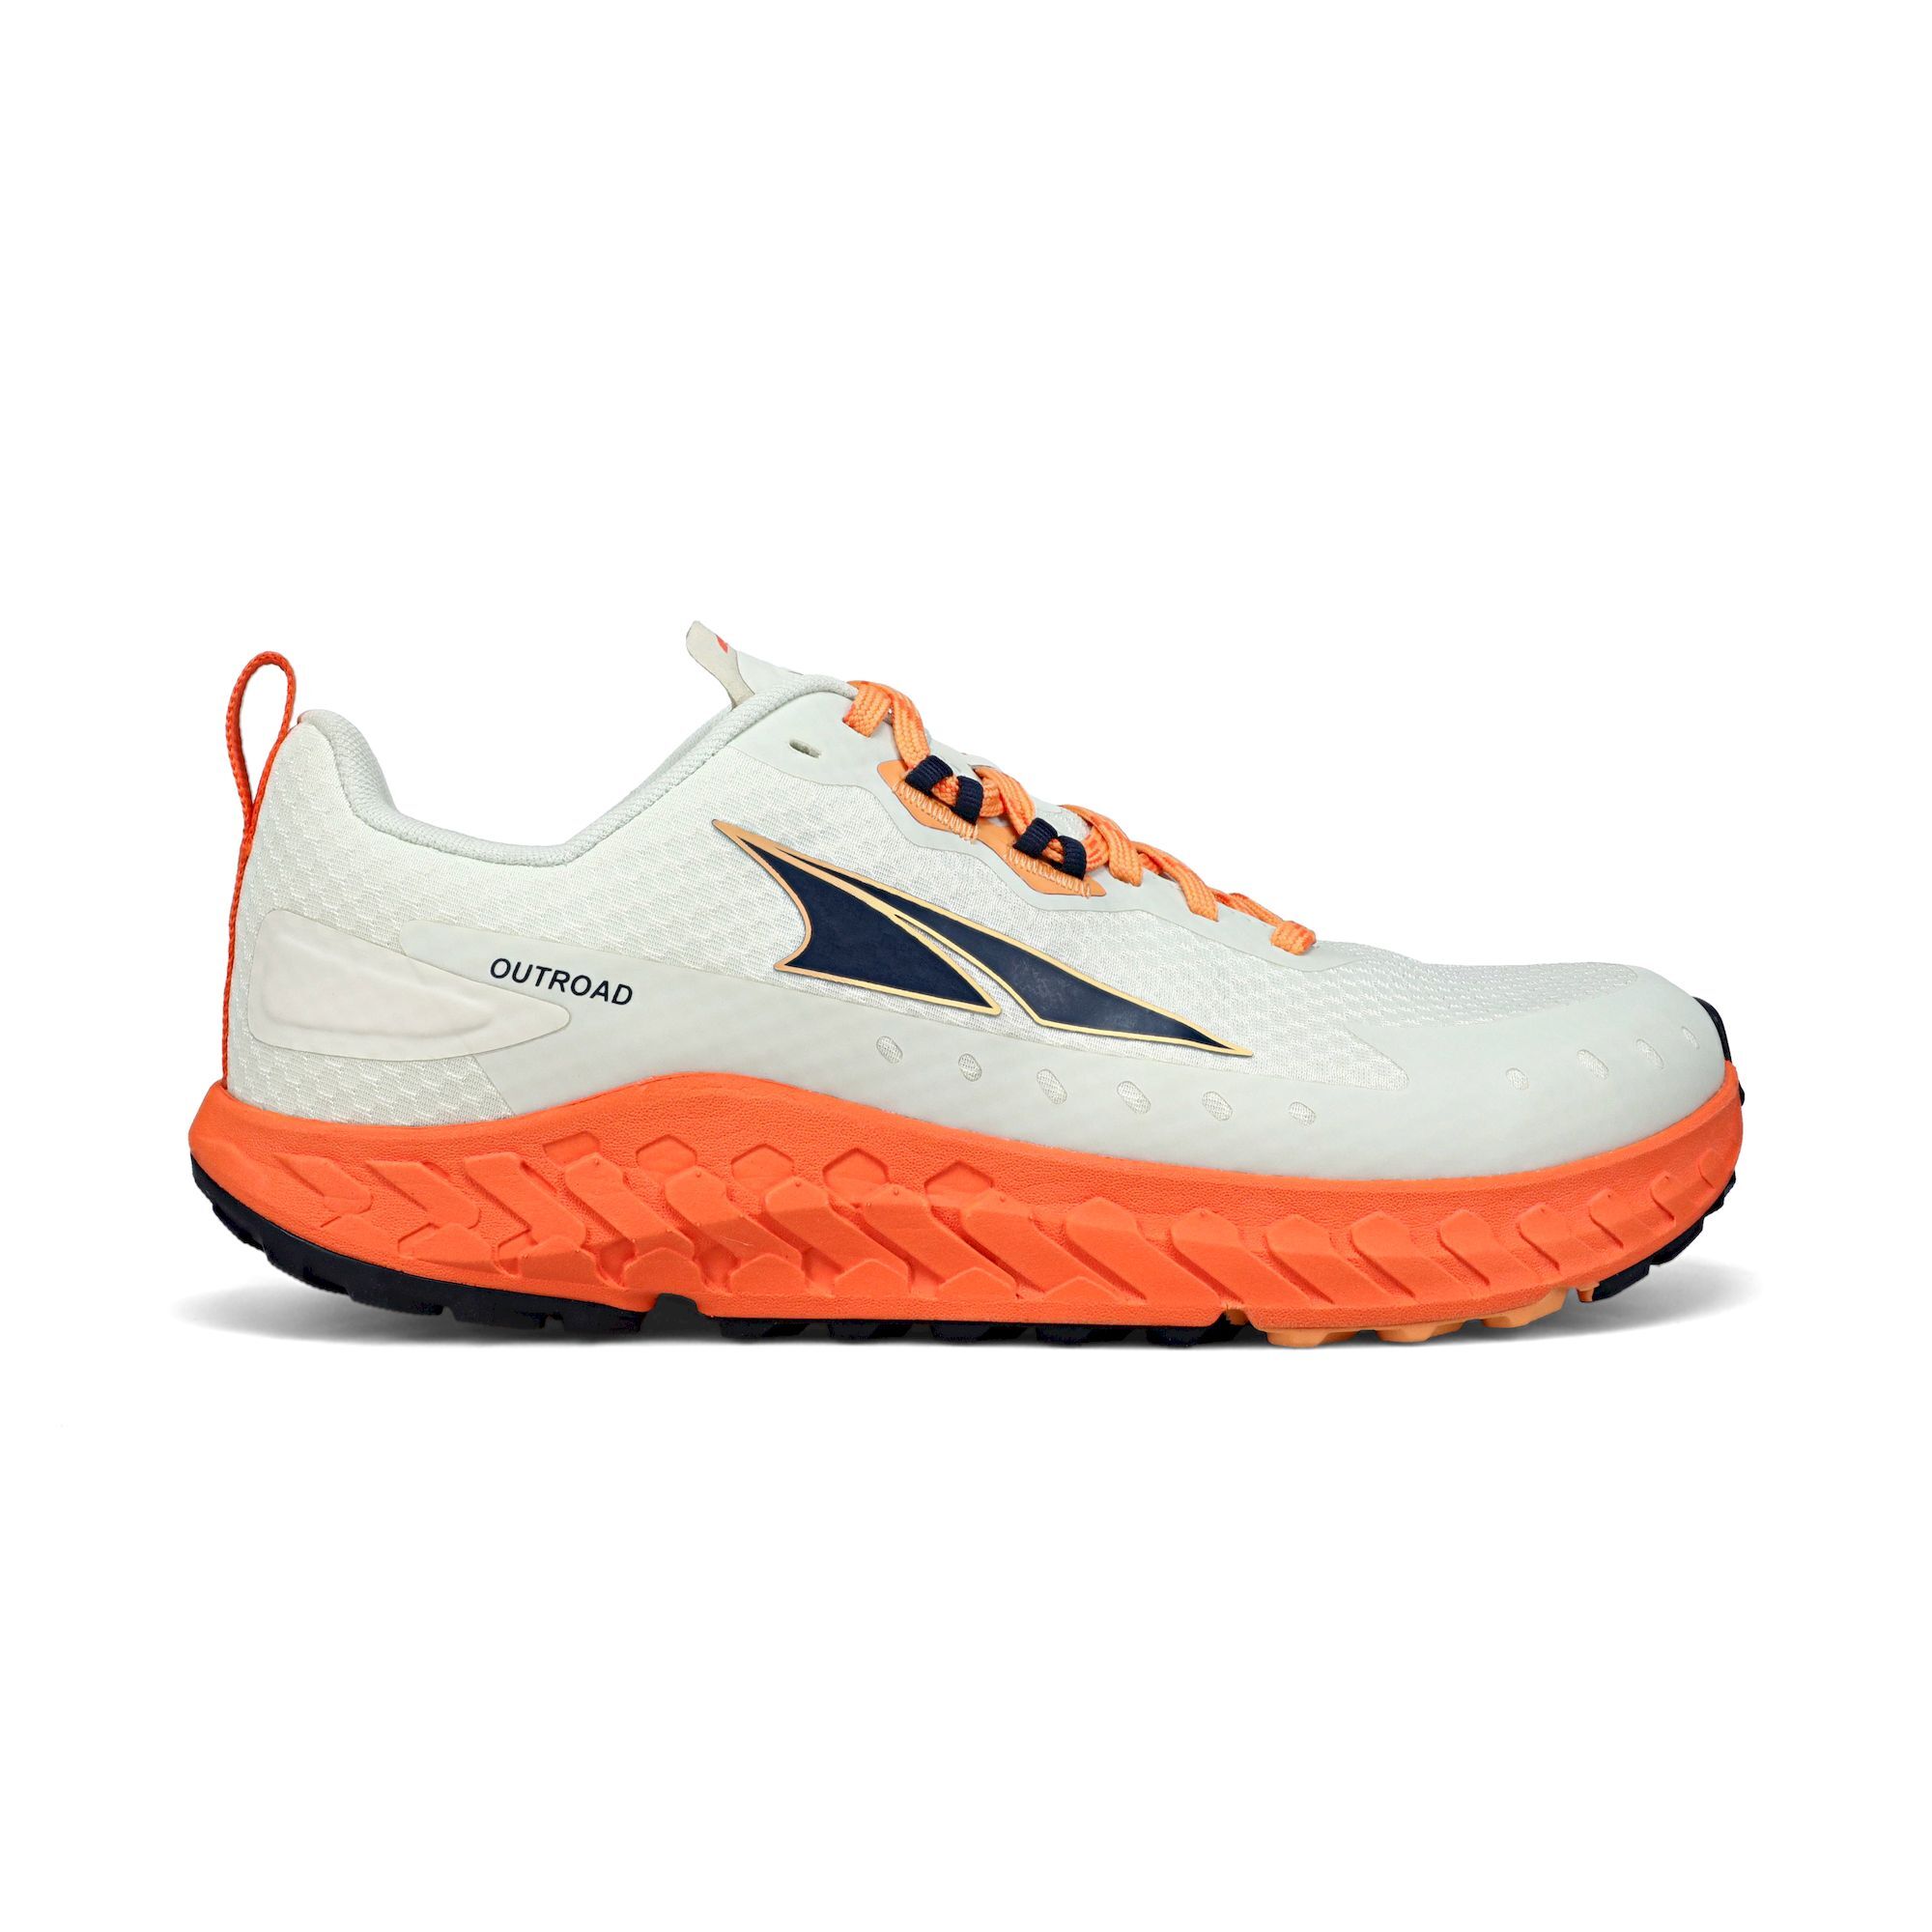 Altra Outroad - Trail running shoes - Men's